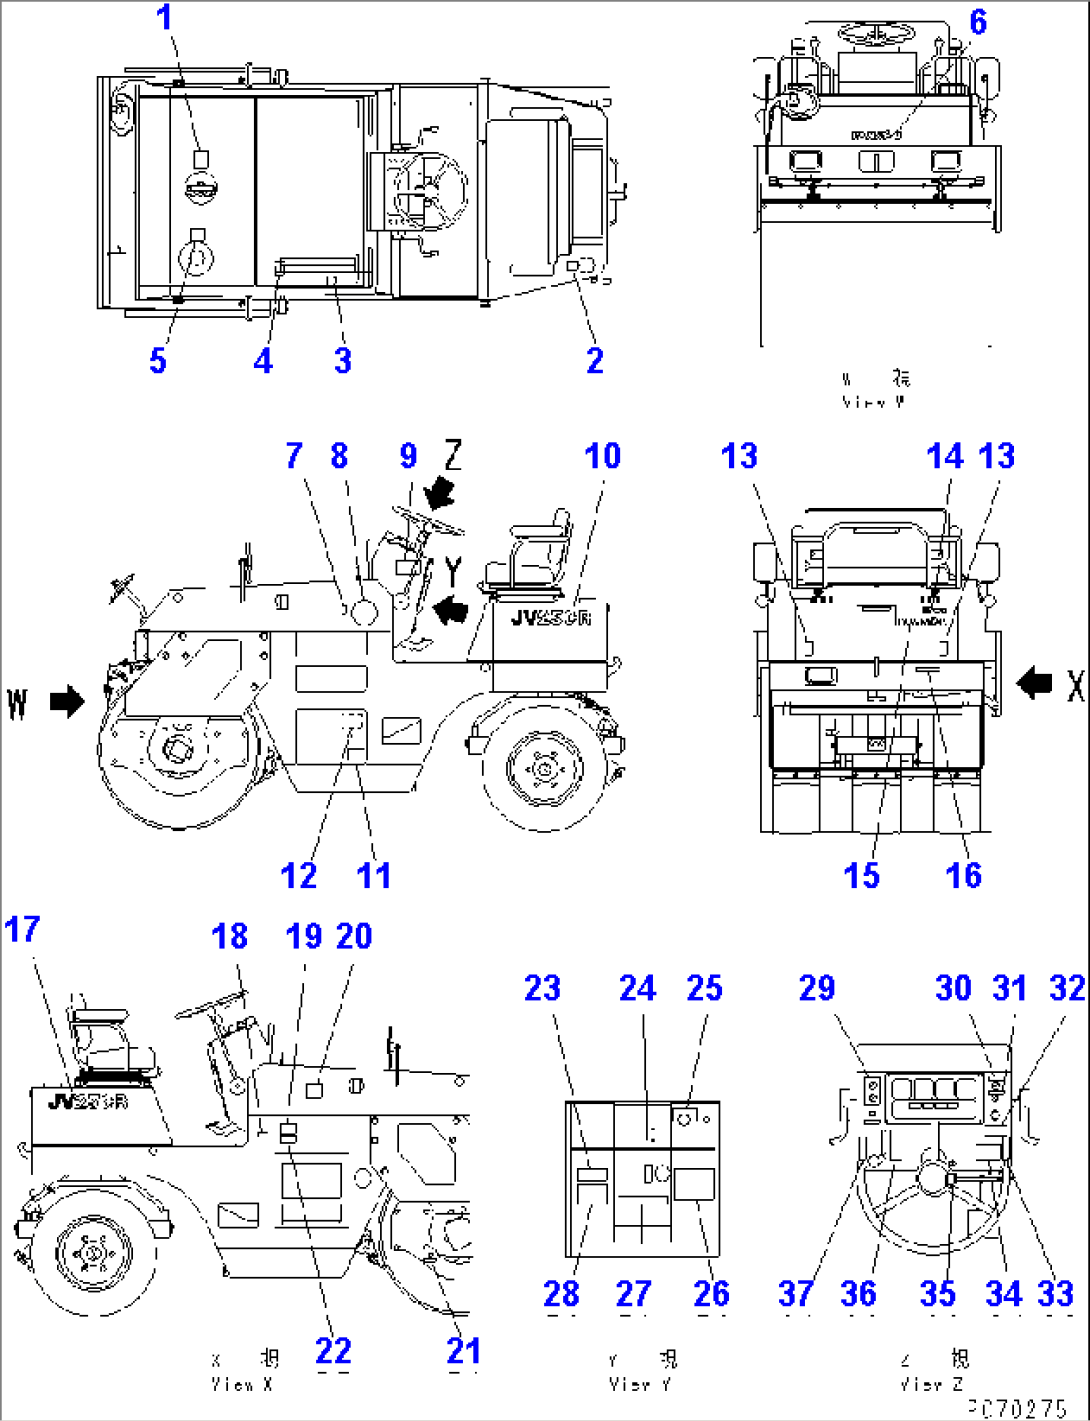 MARKS AND PLATES(#7001-7030)